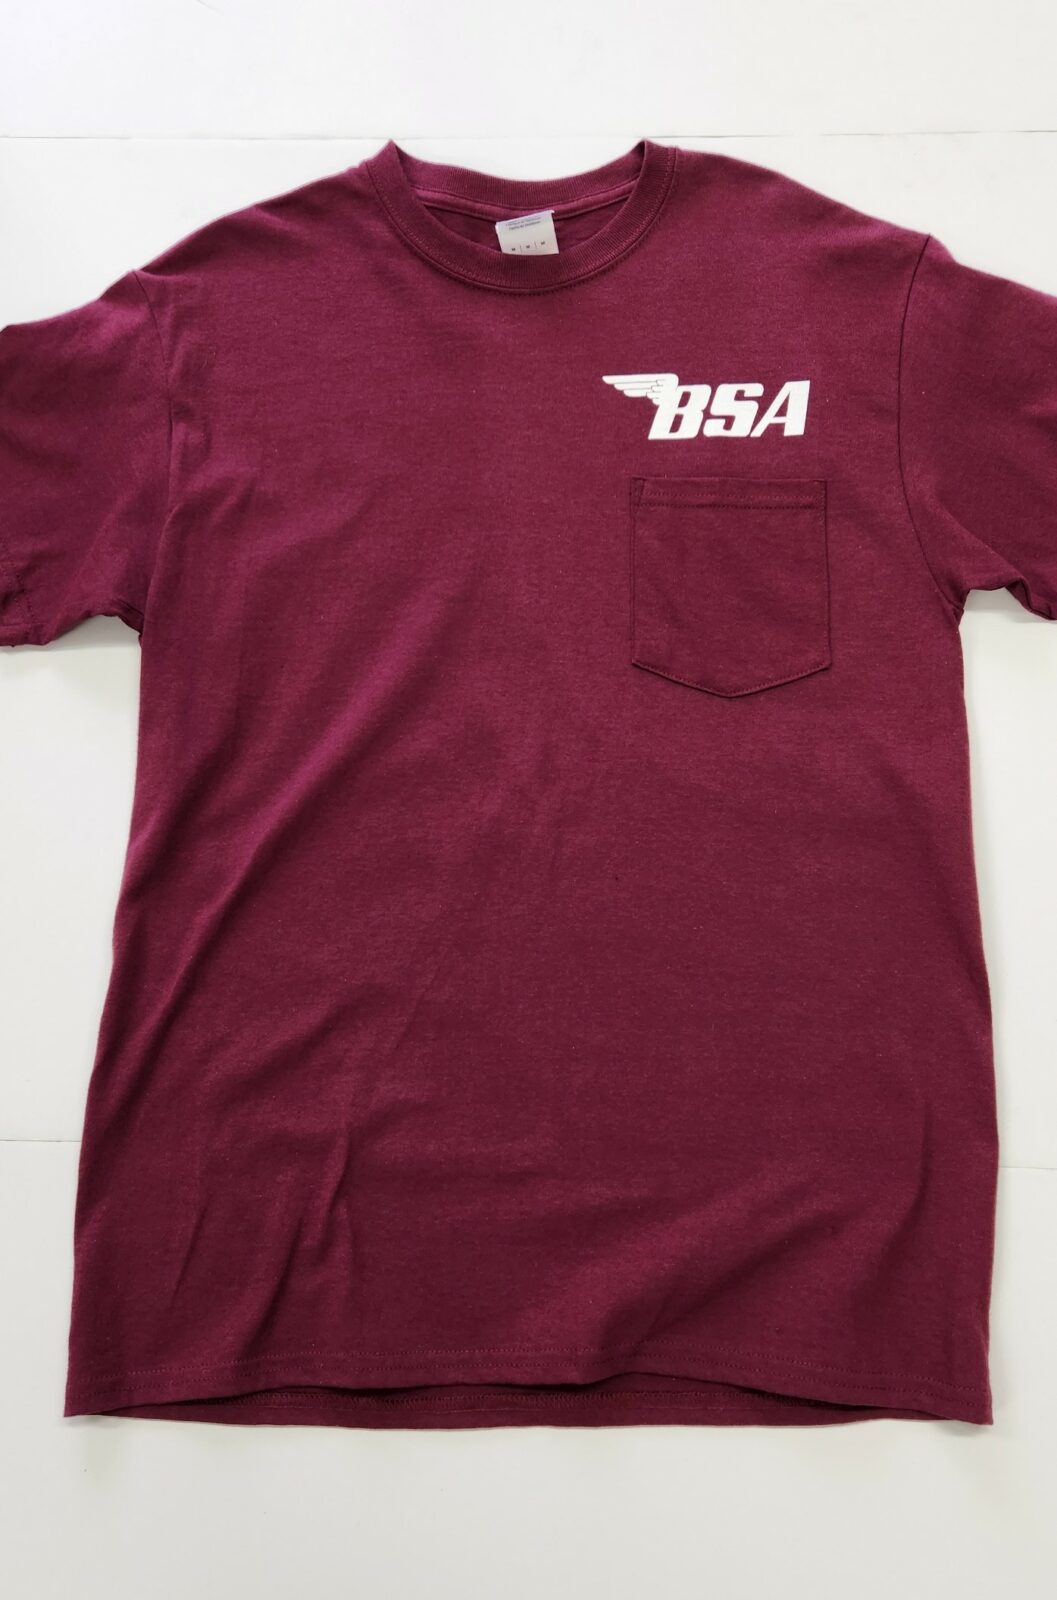 MP40-299 TShirt, Maroon Pocket with White BSA Logo – Morrie's Place Cycle